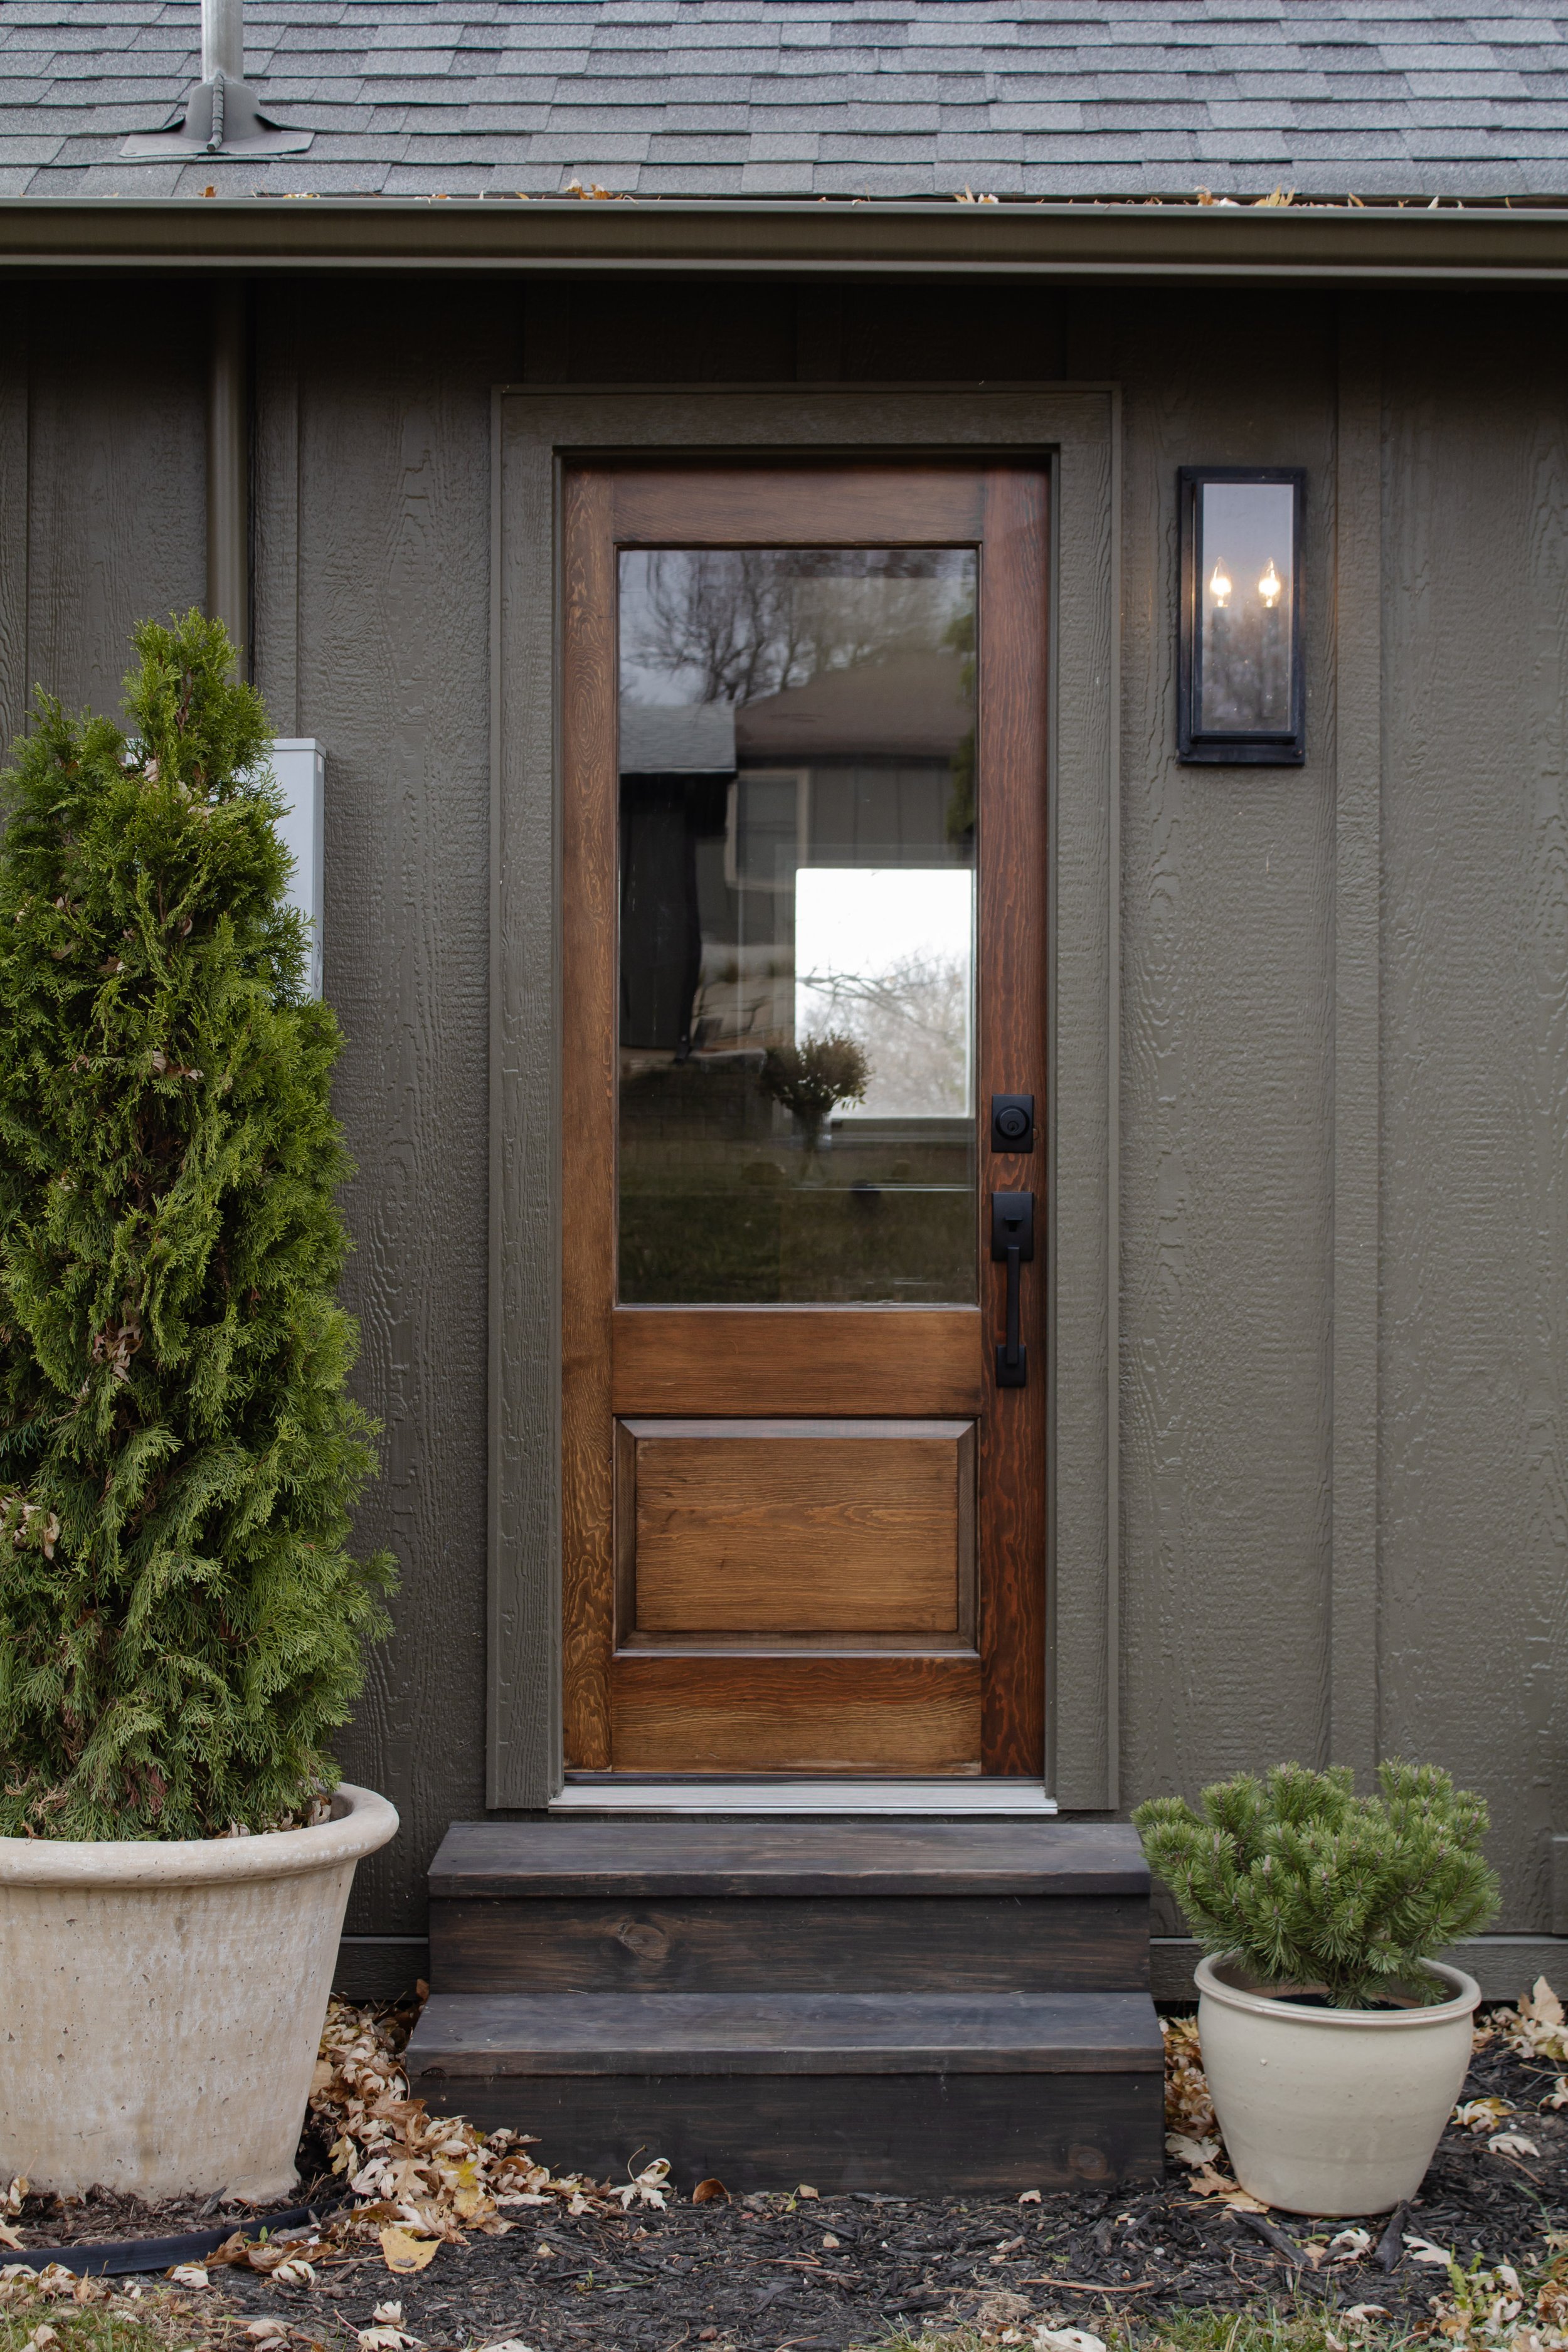 How to salvage & refinish an old wood exterior door - Nadine Stay. How to sand, stain, and seal an exterior wood door. How to protect a wood door from weather, rain, moisture, and color fading. How to refinish a wood door like a professional